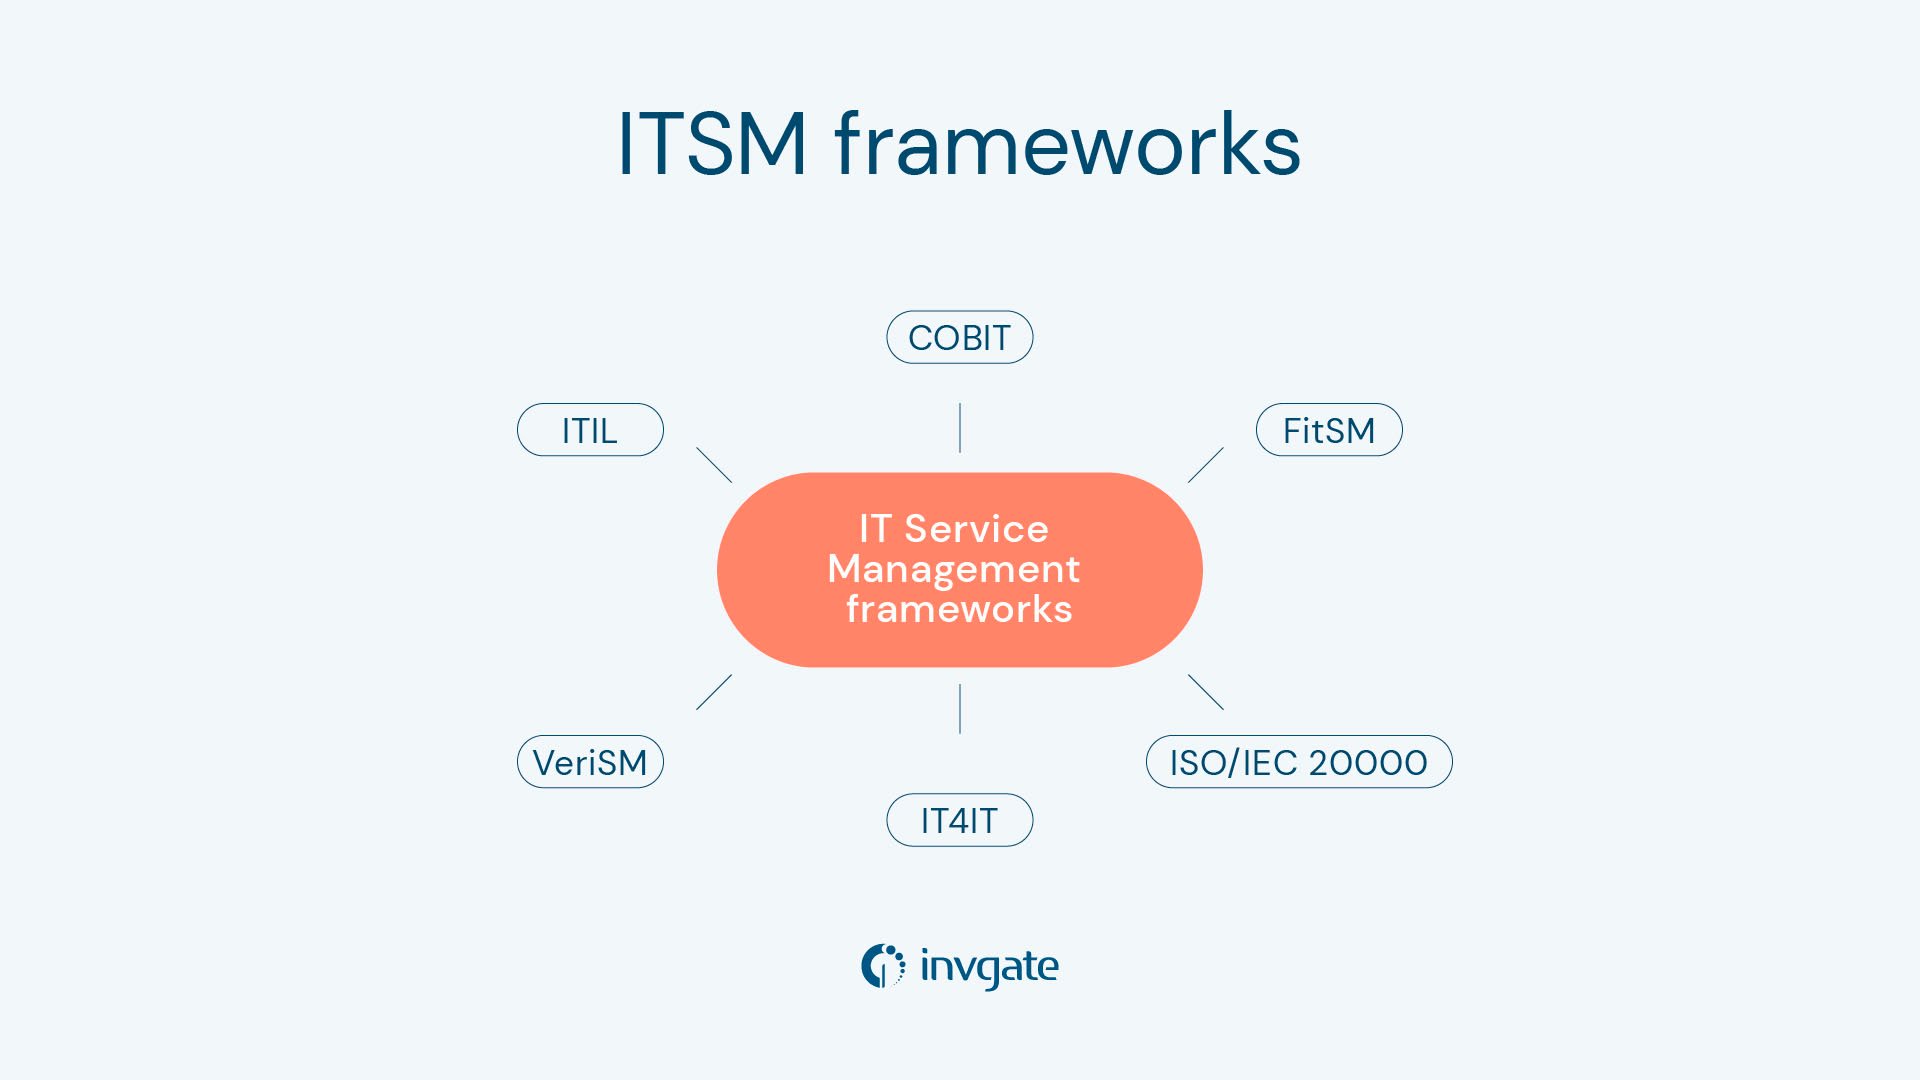 The six most relevant ITSM frameworks are: ITIL, COBIT, FitSM, ISO/IEC 20000, IT4IT, and VeriSM.